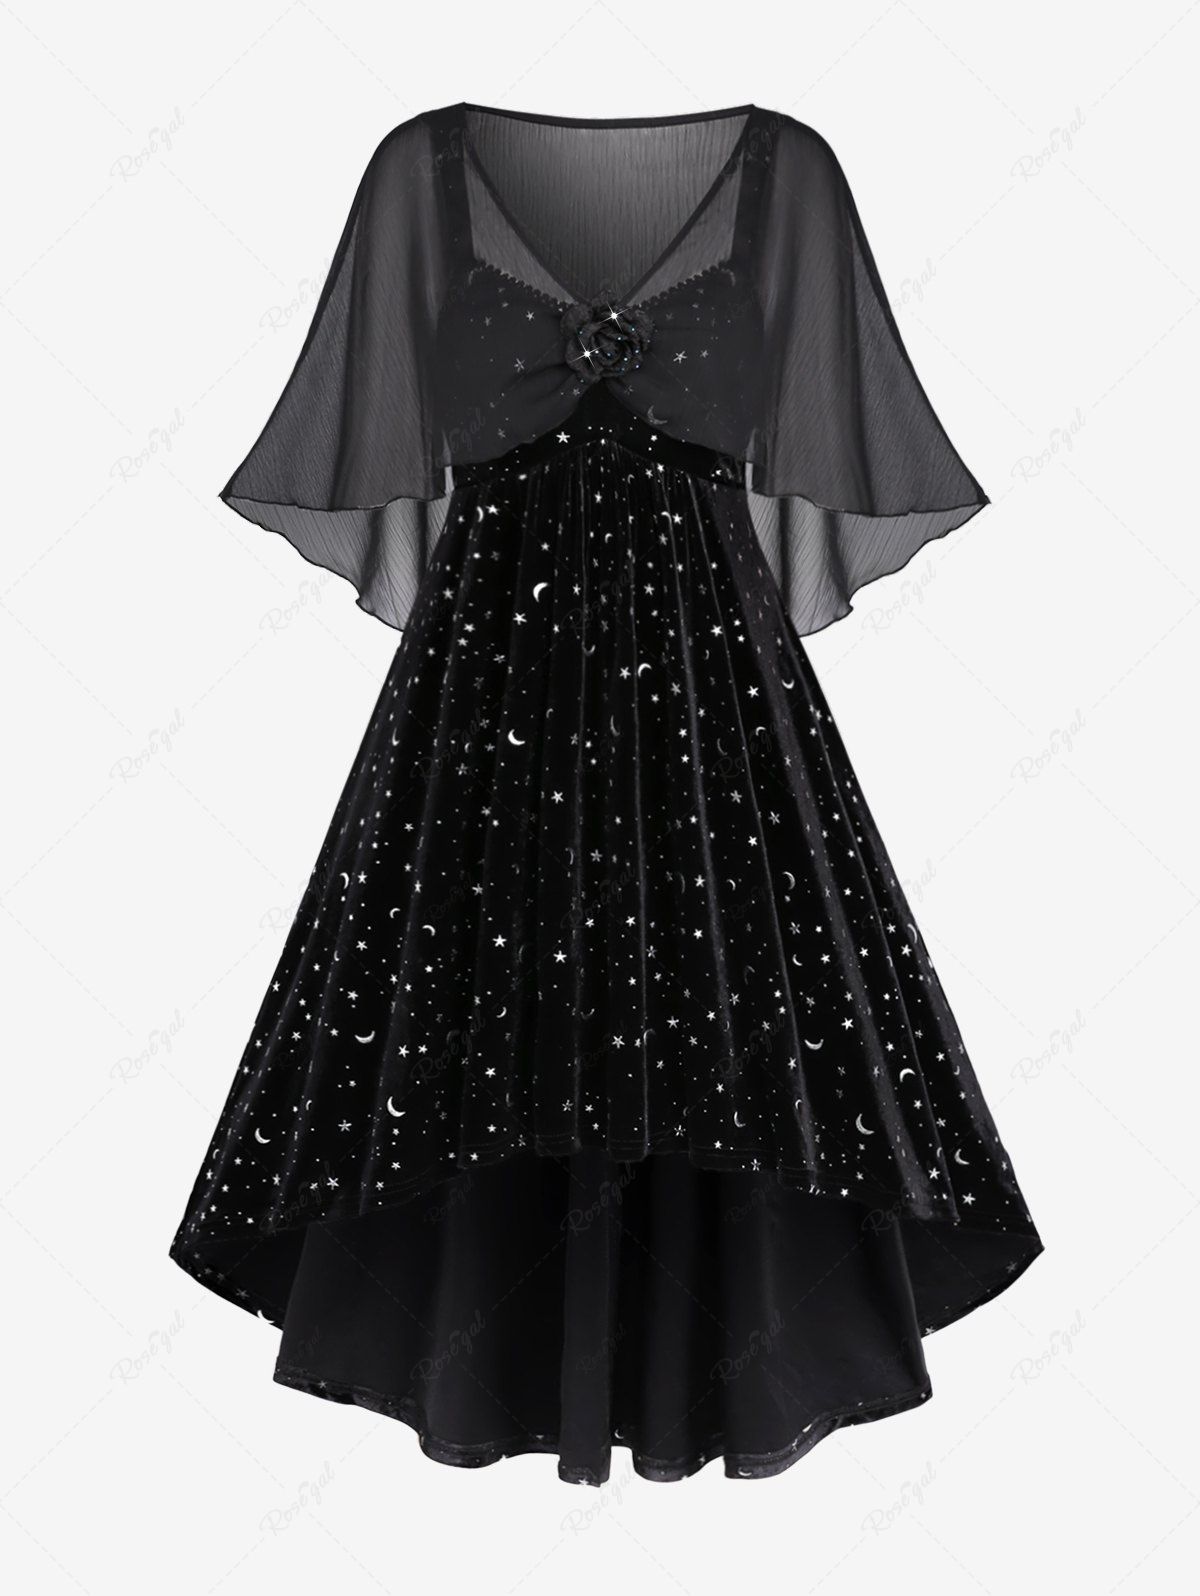 Hot Plus Size Moon Stars Silver Stamping Ruched High Low Velvet A Line Dress and Floral Buckle Chiffon Overlay Cape Set  